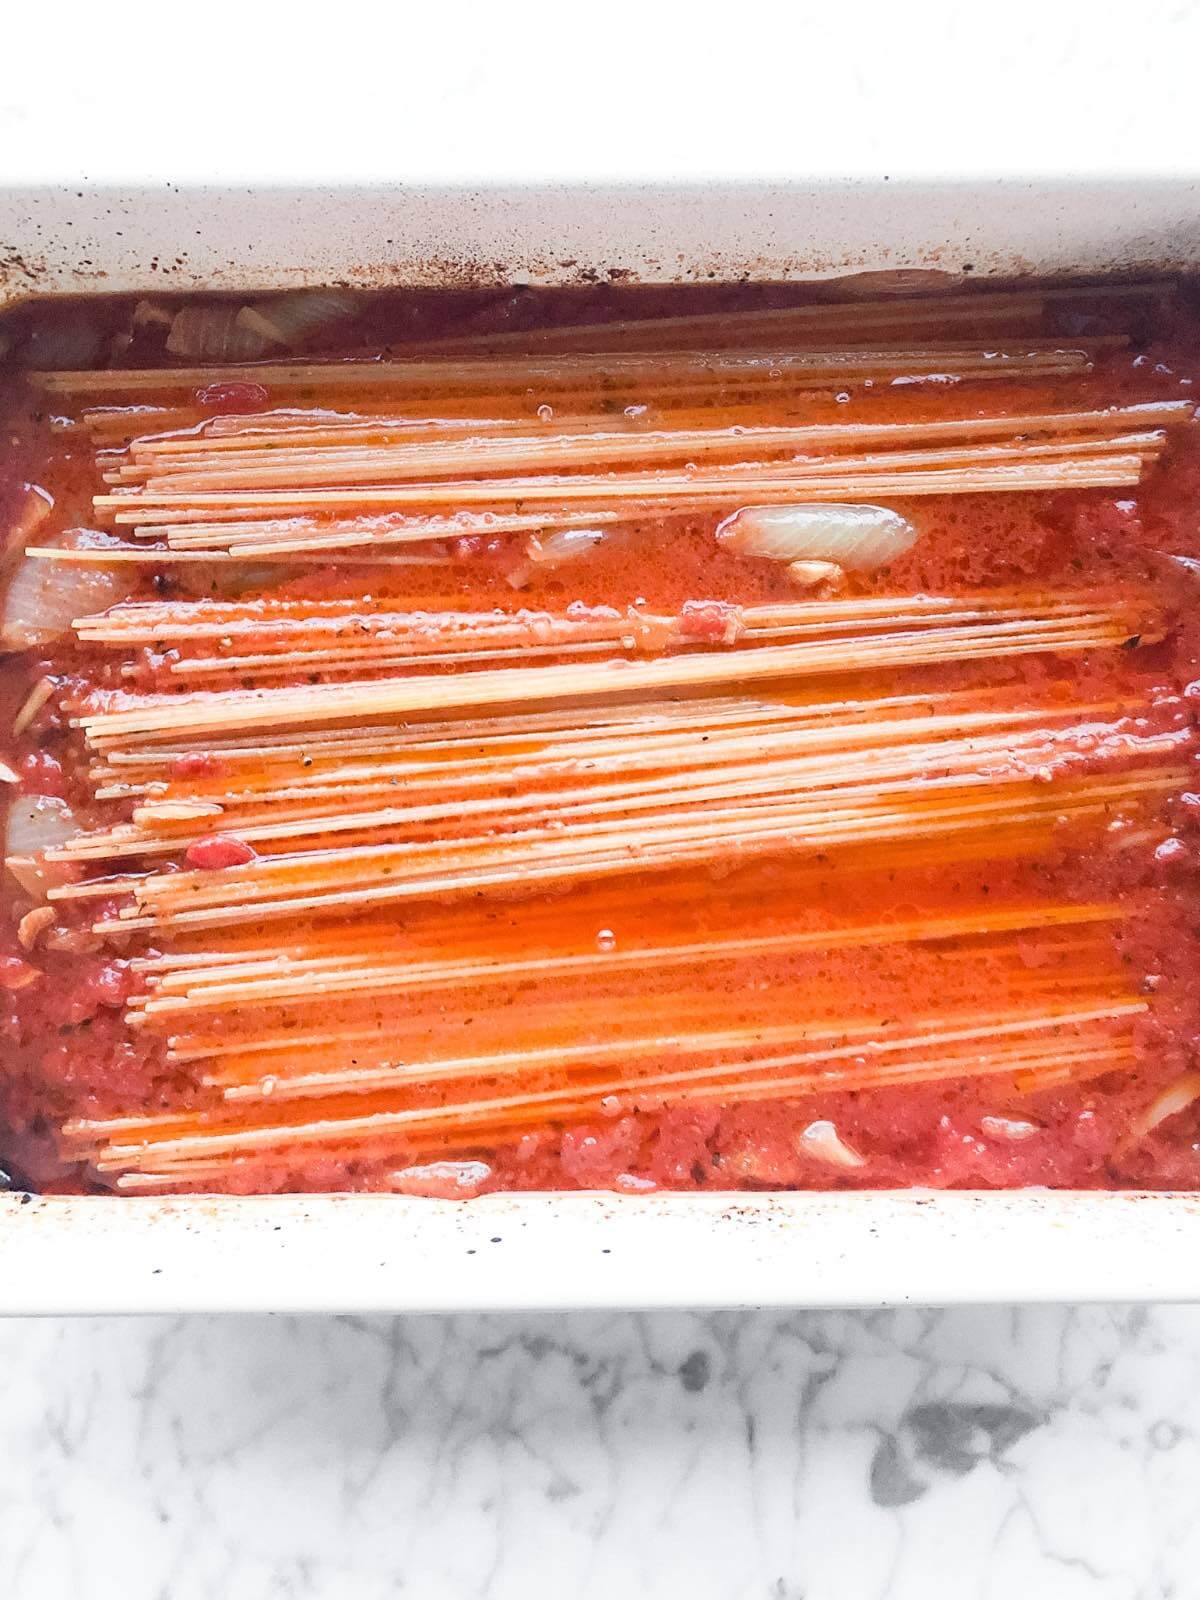 uncooked spaghetti and tomato sauce in a baking dish